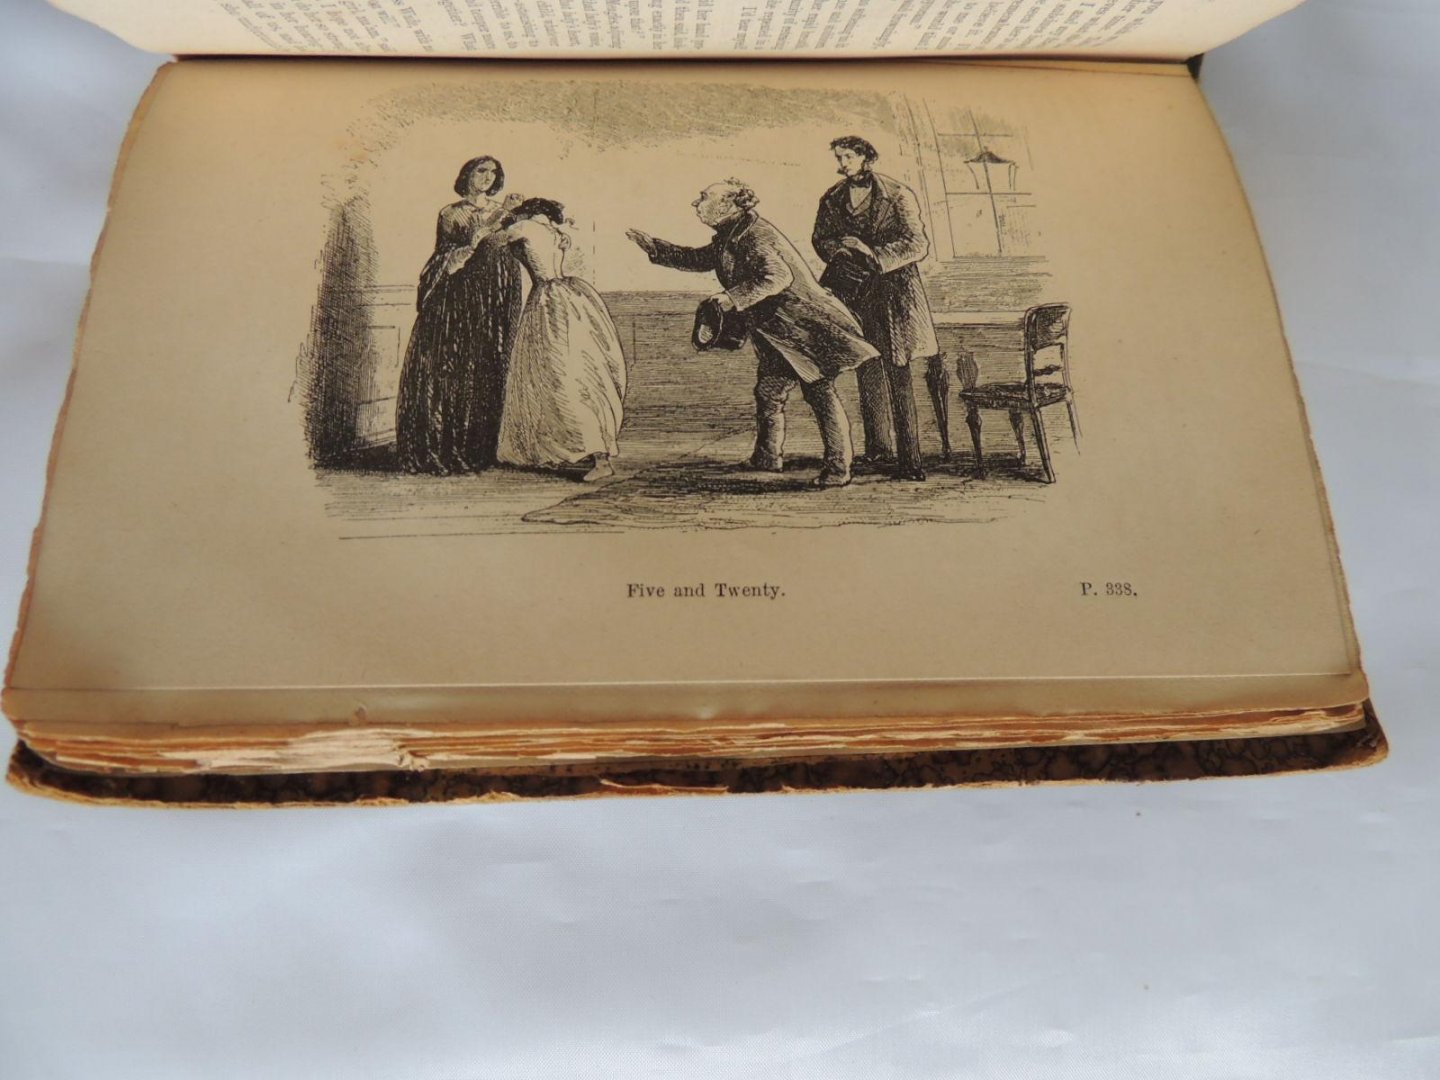 Dickens, Charles - Little Dorrit - with frontpiece